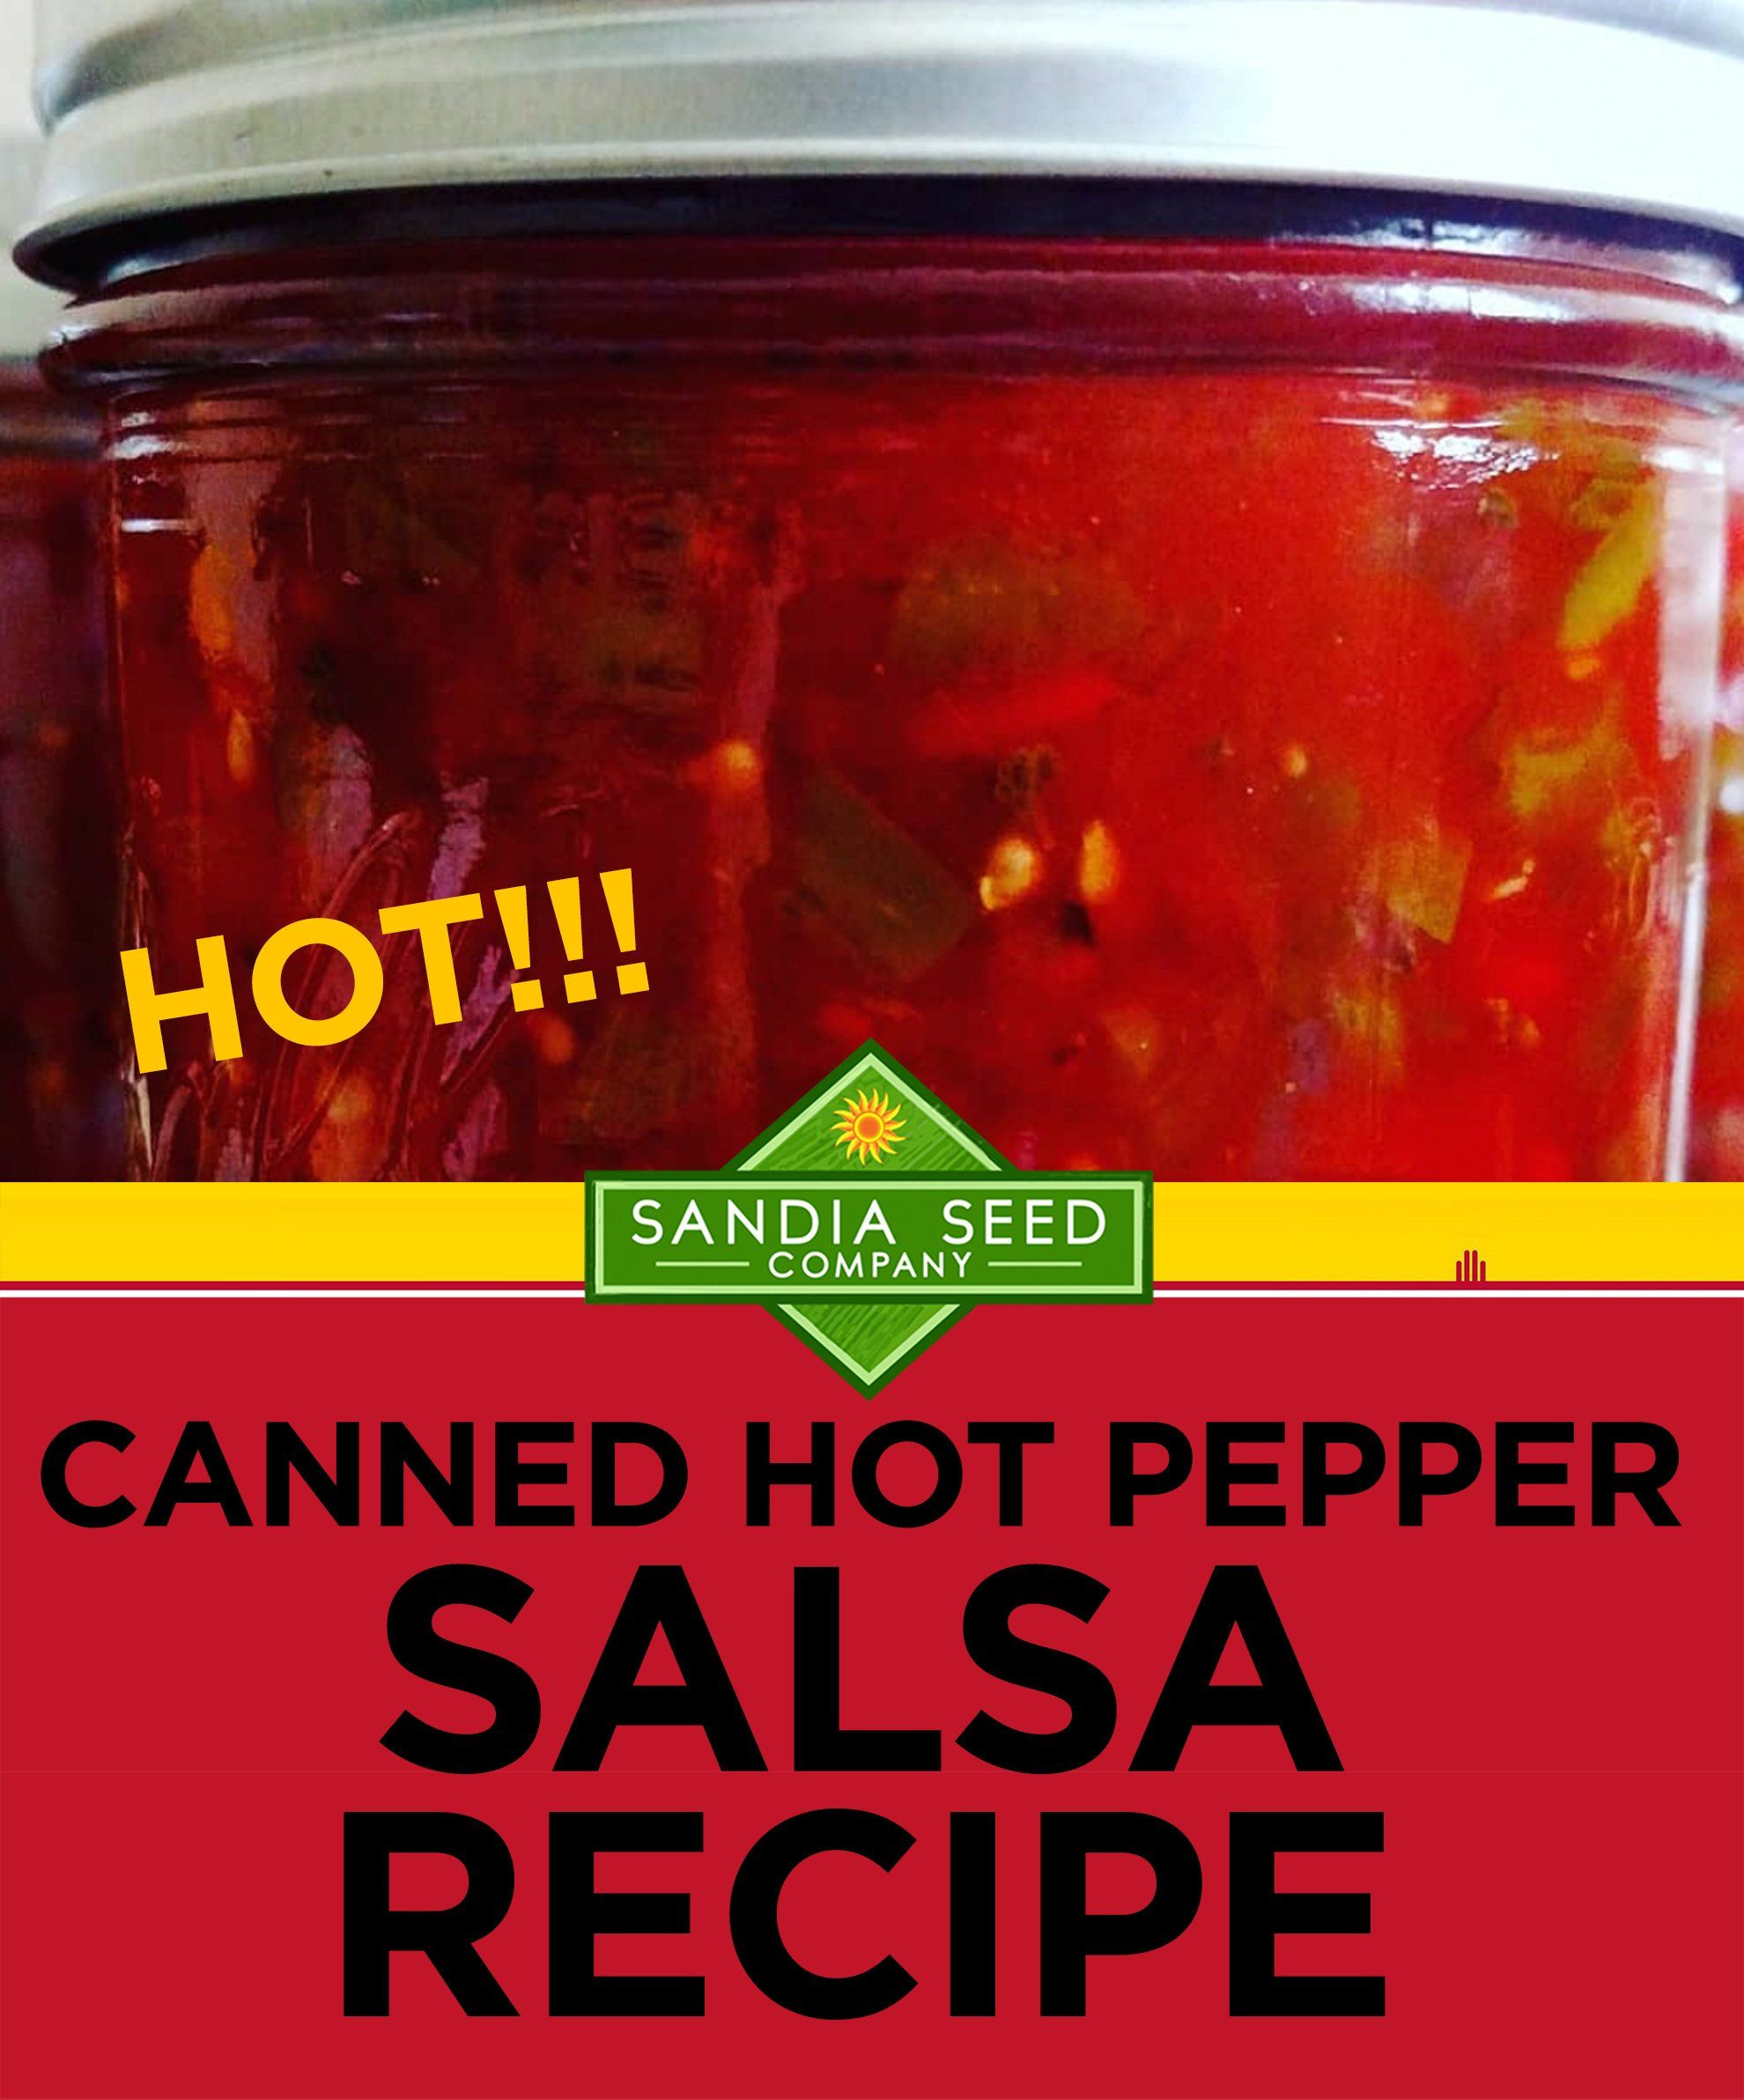 Hot Salsa Recipe For Canning
 This Canned Hot salsa Recipe from Sandia Seed sounds